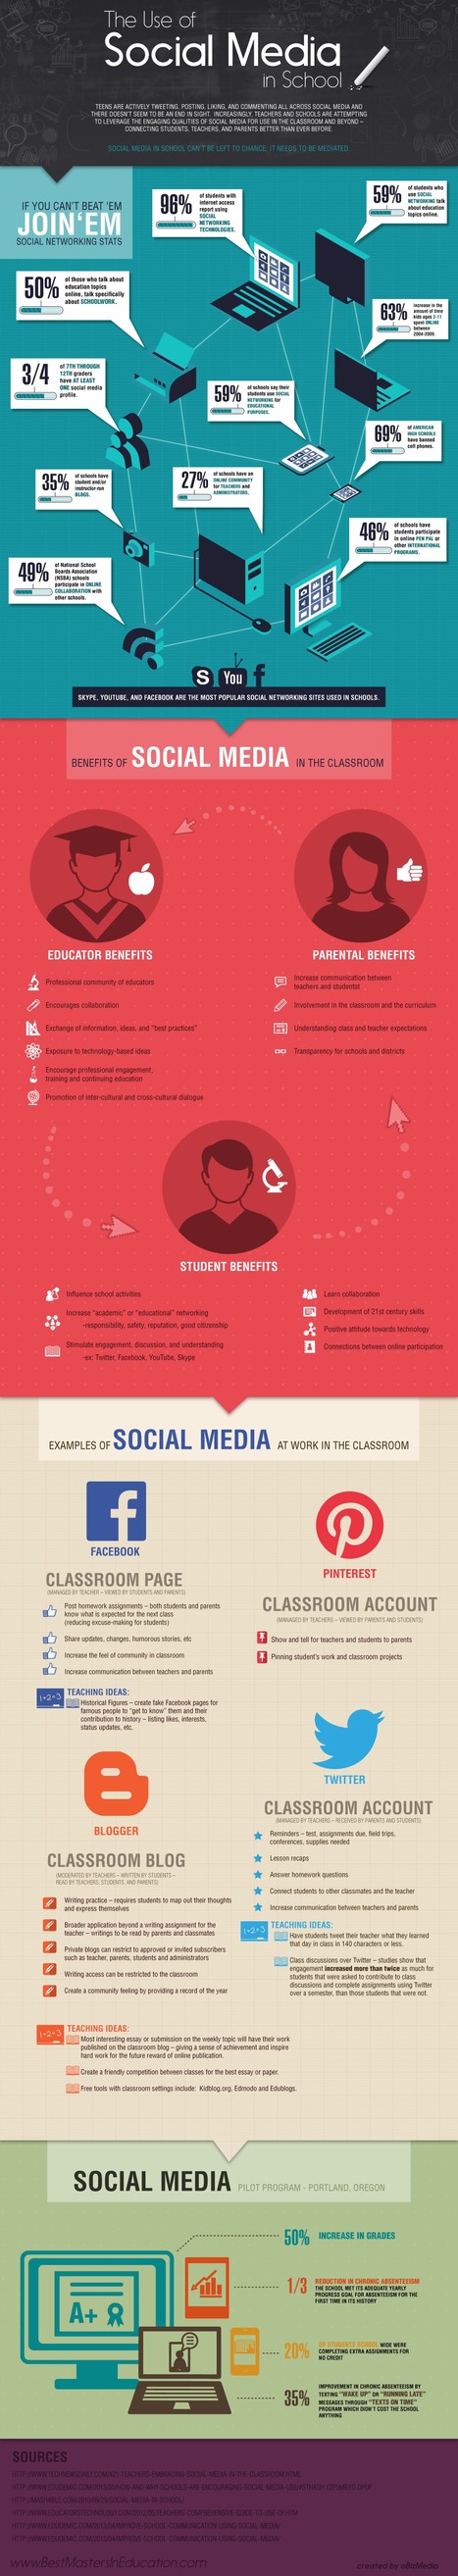 Social Media 101: Is There a Place For Social Media in Classrooms? [Infographic] | Education & Numérique | Scoop.it